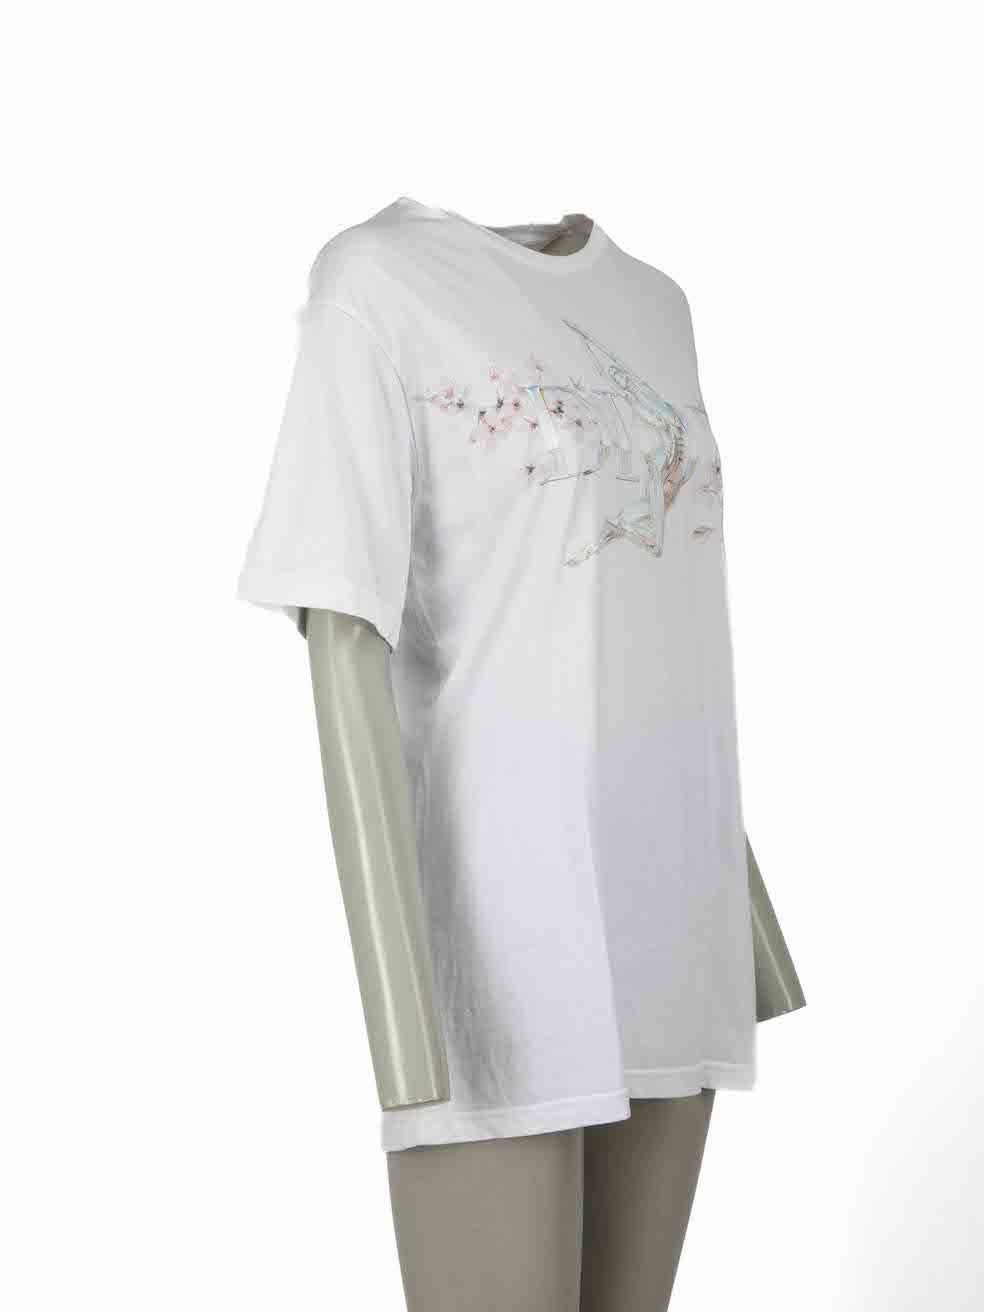 CONDITION is Very good. Minimal wear to top is evident. Minimal wear to front neckline, front and back of hemline where stains is evident on this used Dior designer resale item.
  
Details
Dior x Kim Jones
Pre-Fall 2019
White
Cotton
T-shirt
Sorayama